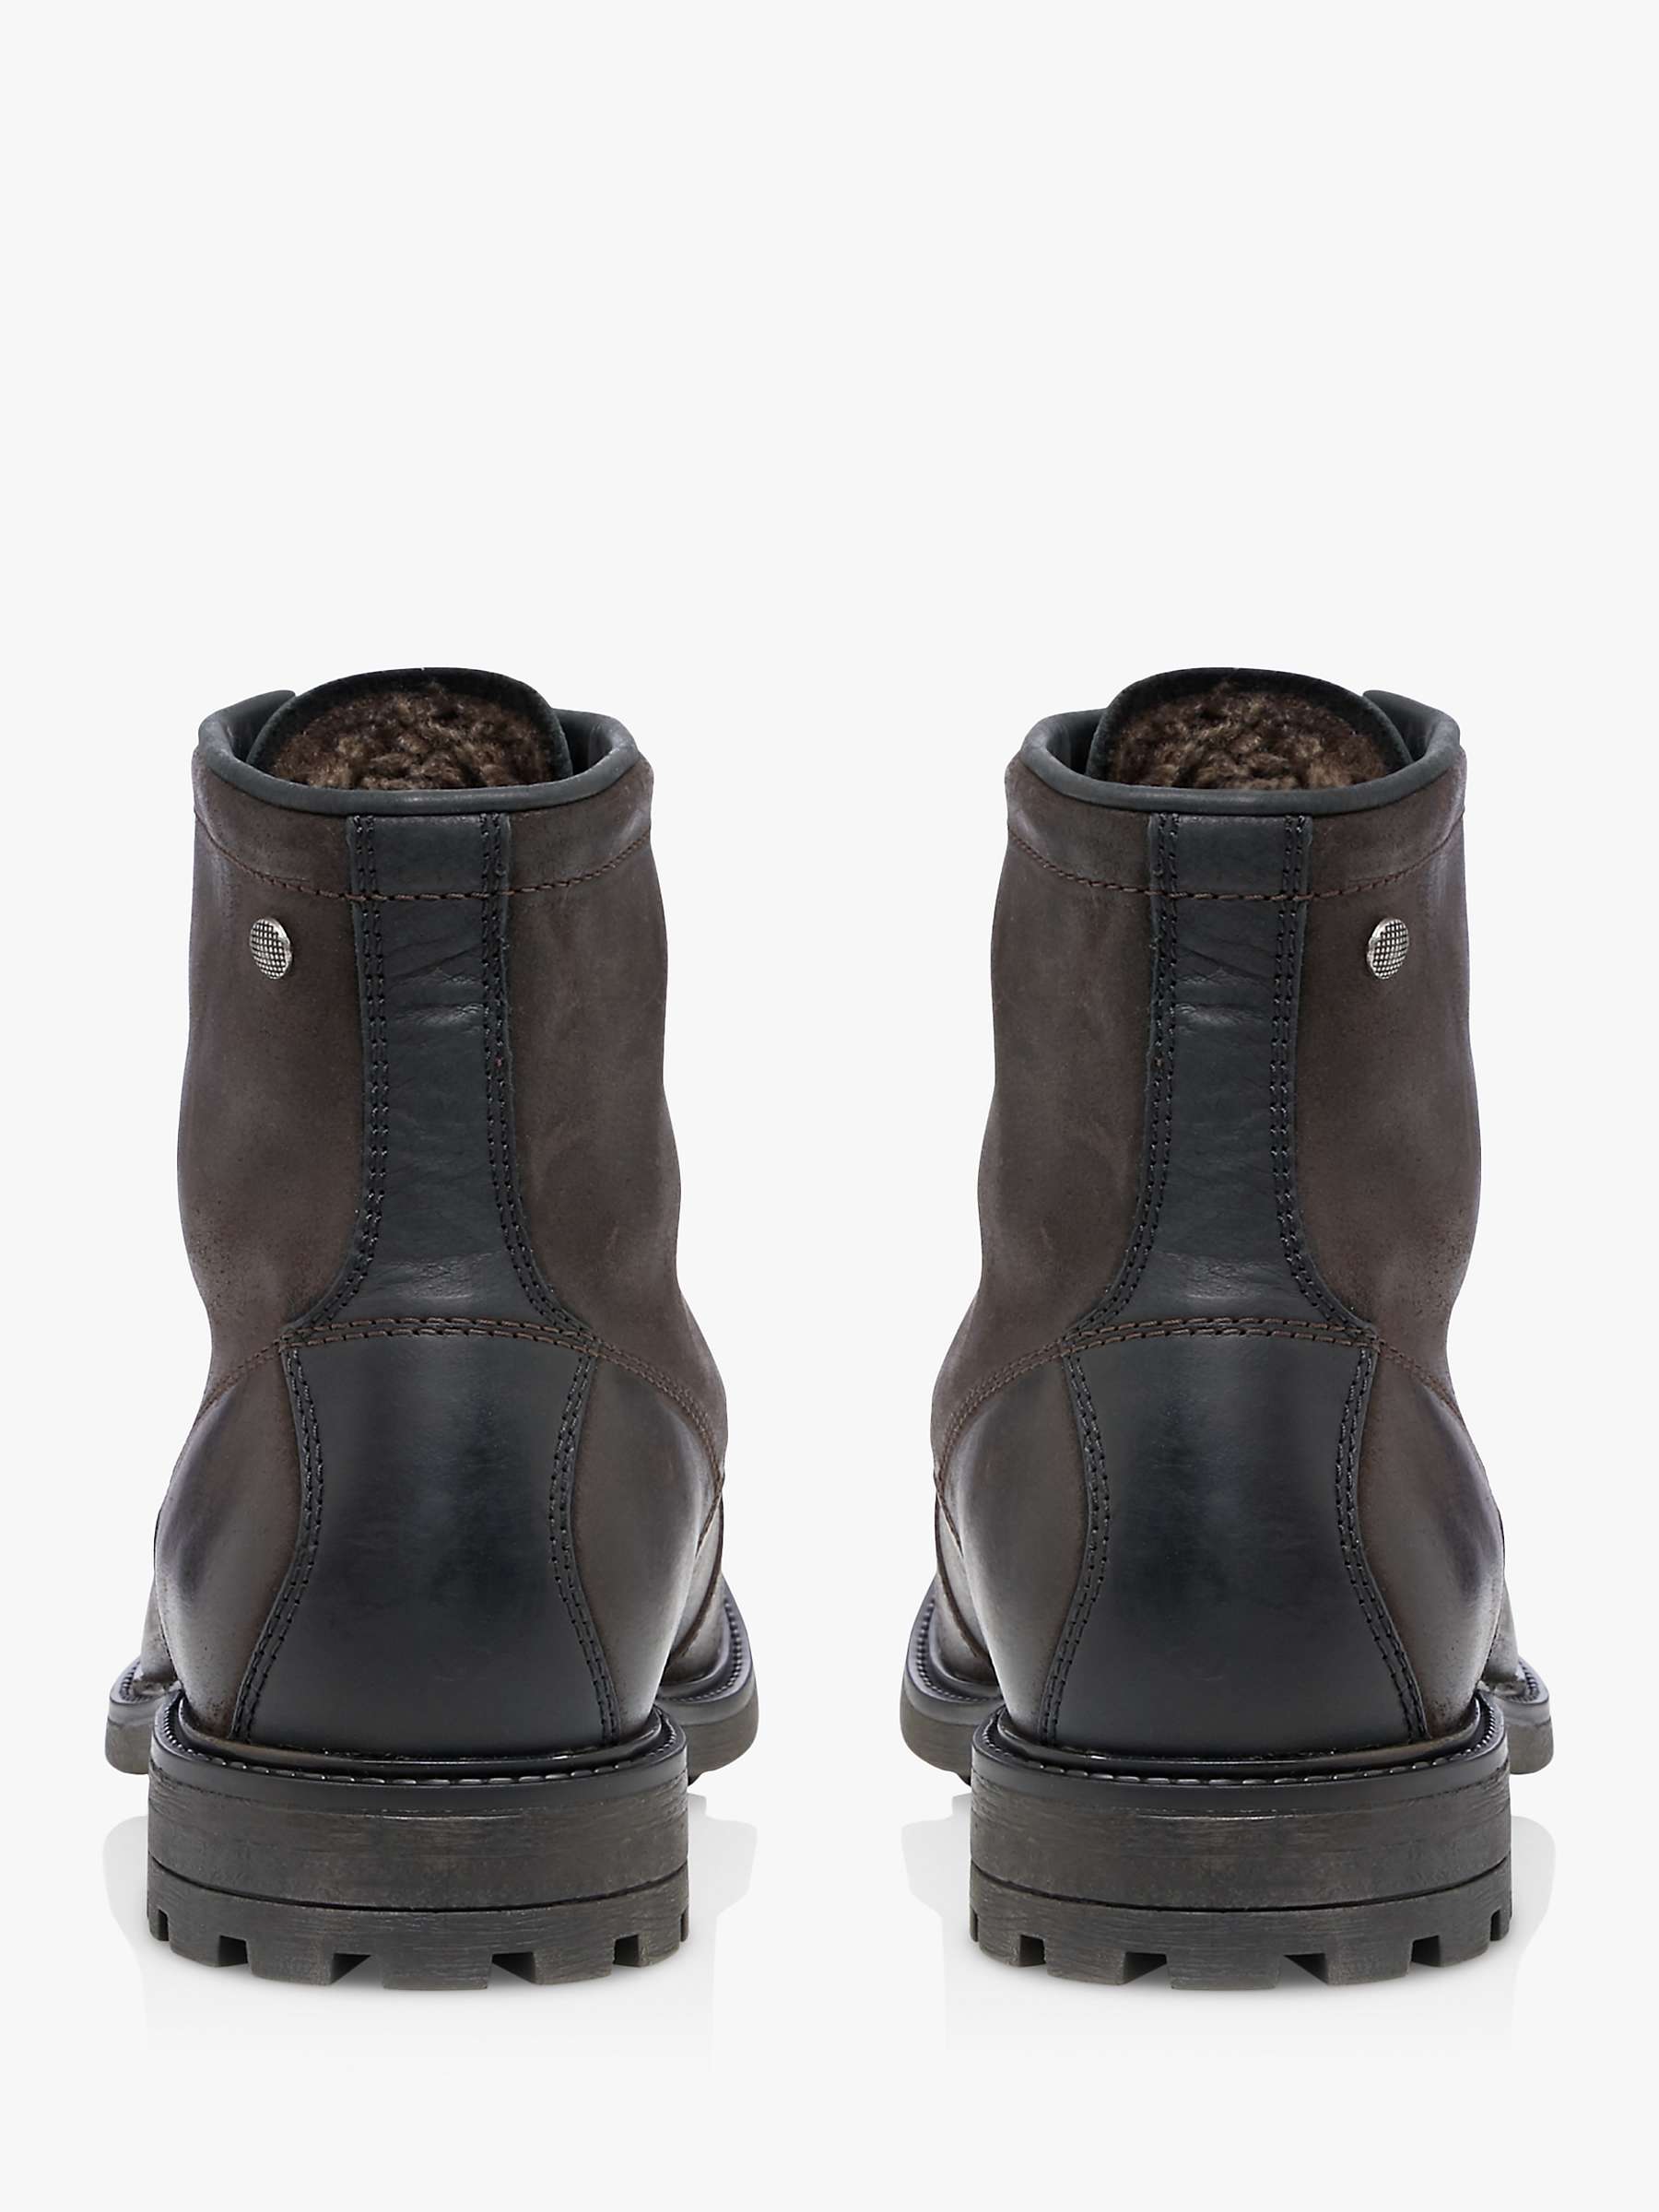 Buy Dune Credit Lace Up Leather Boots, Brown Online at johnlewis.com